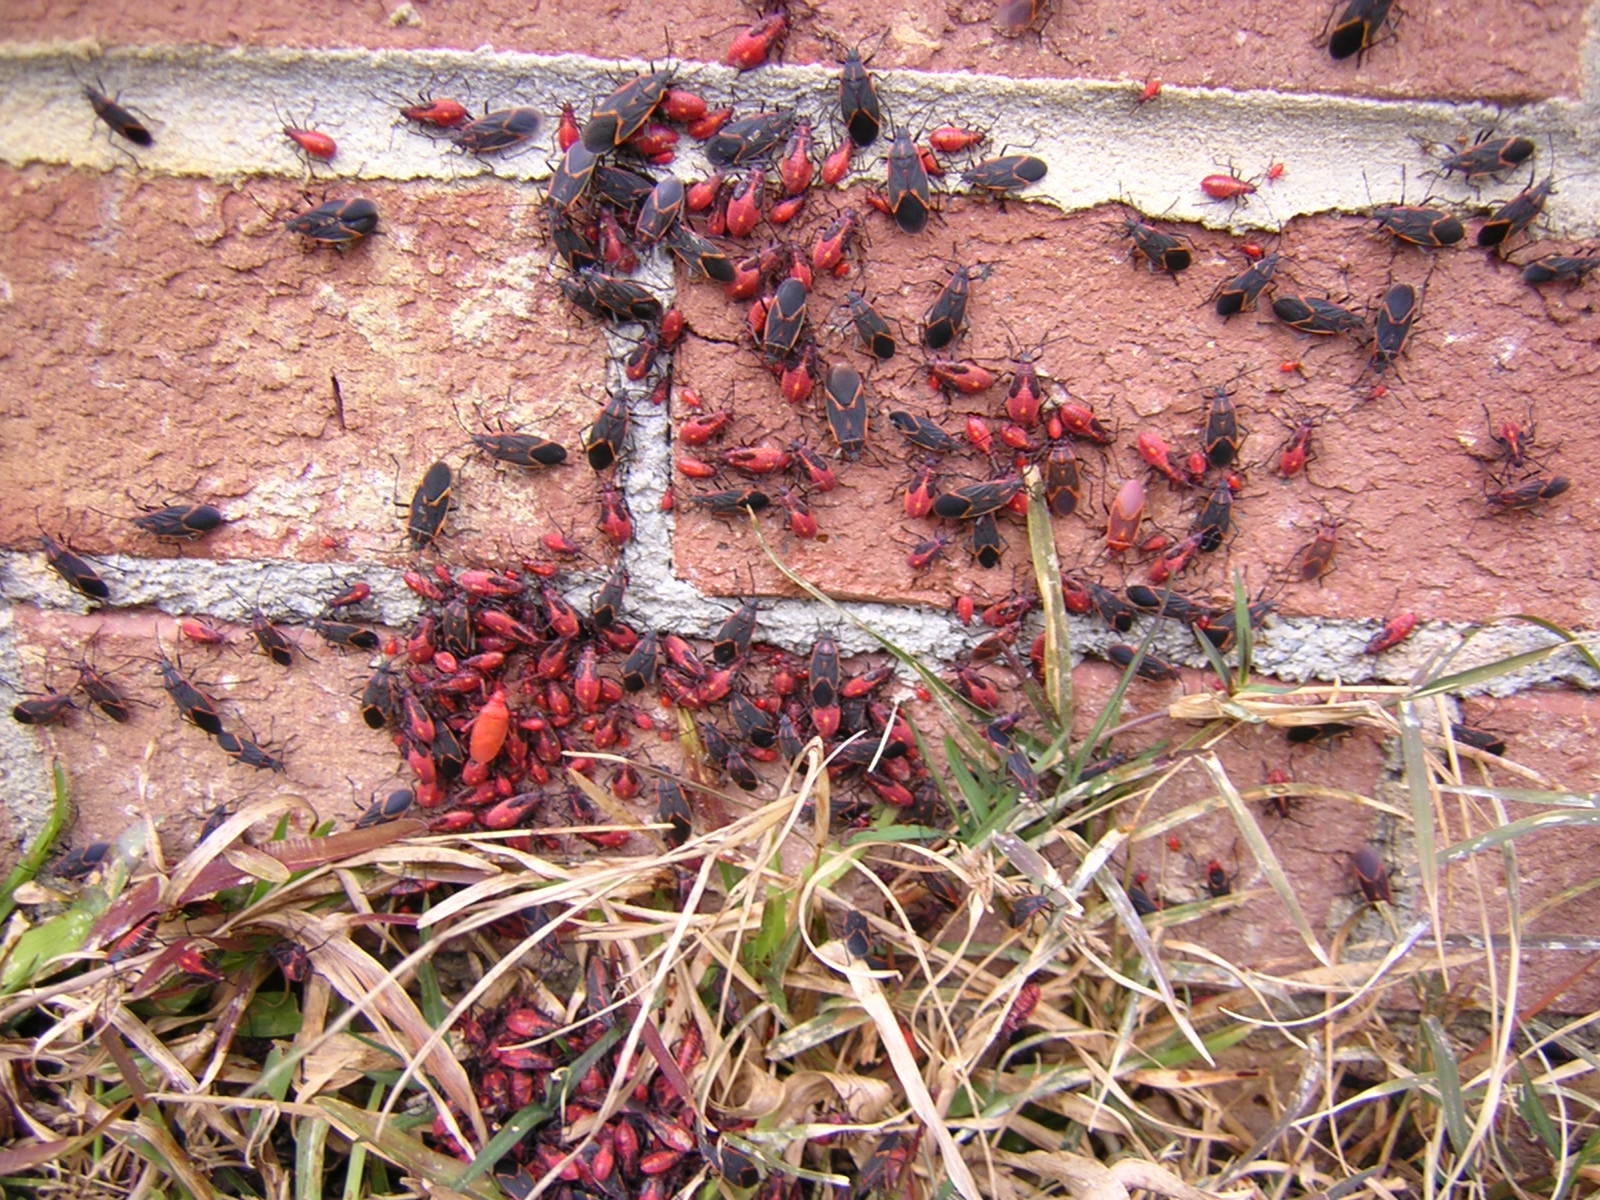 How to Keep Boxelder Bugs Out of Your Home